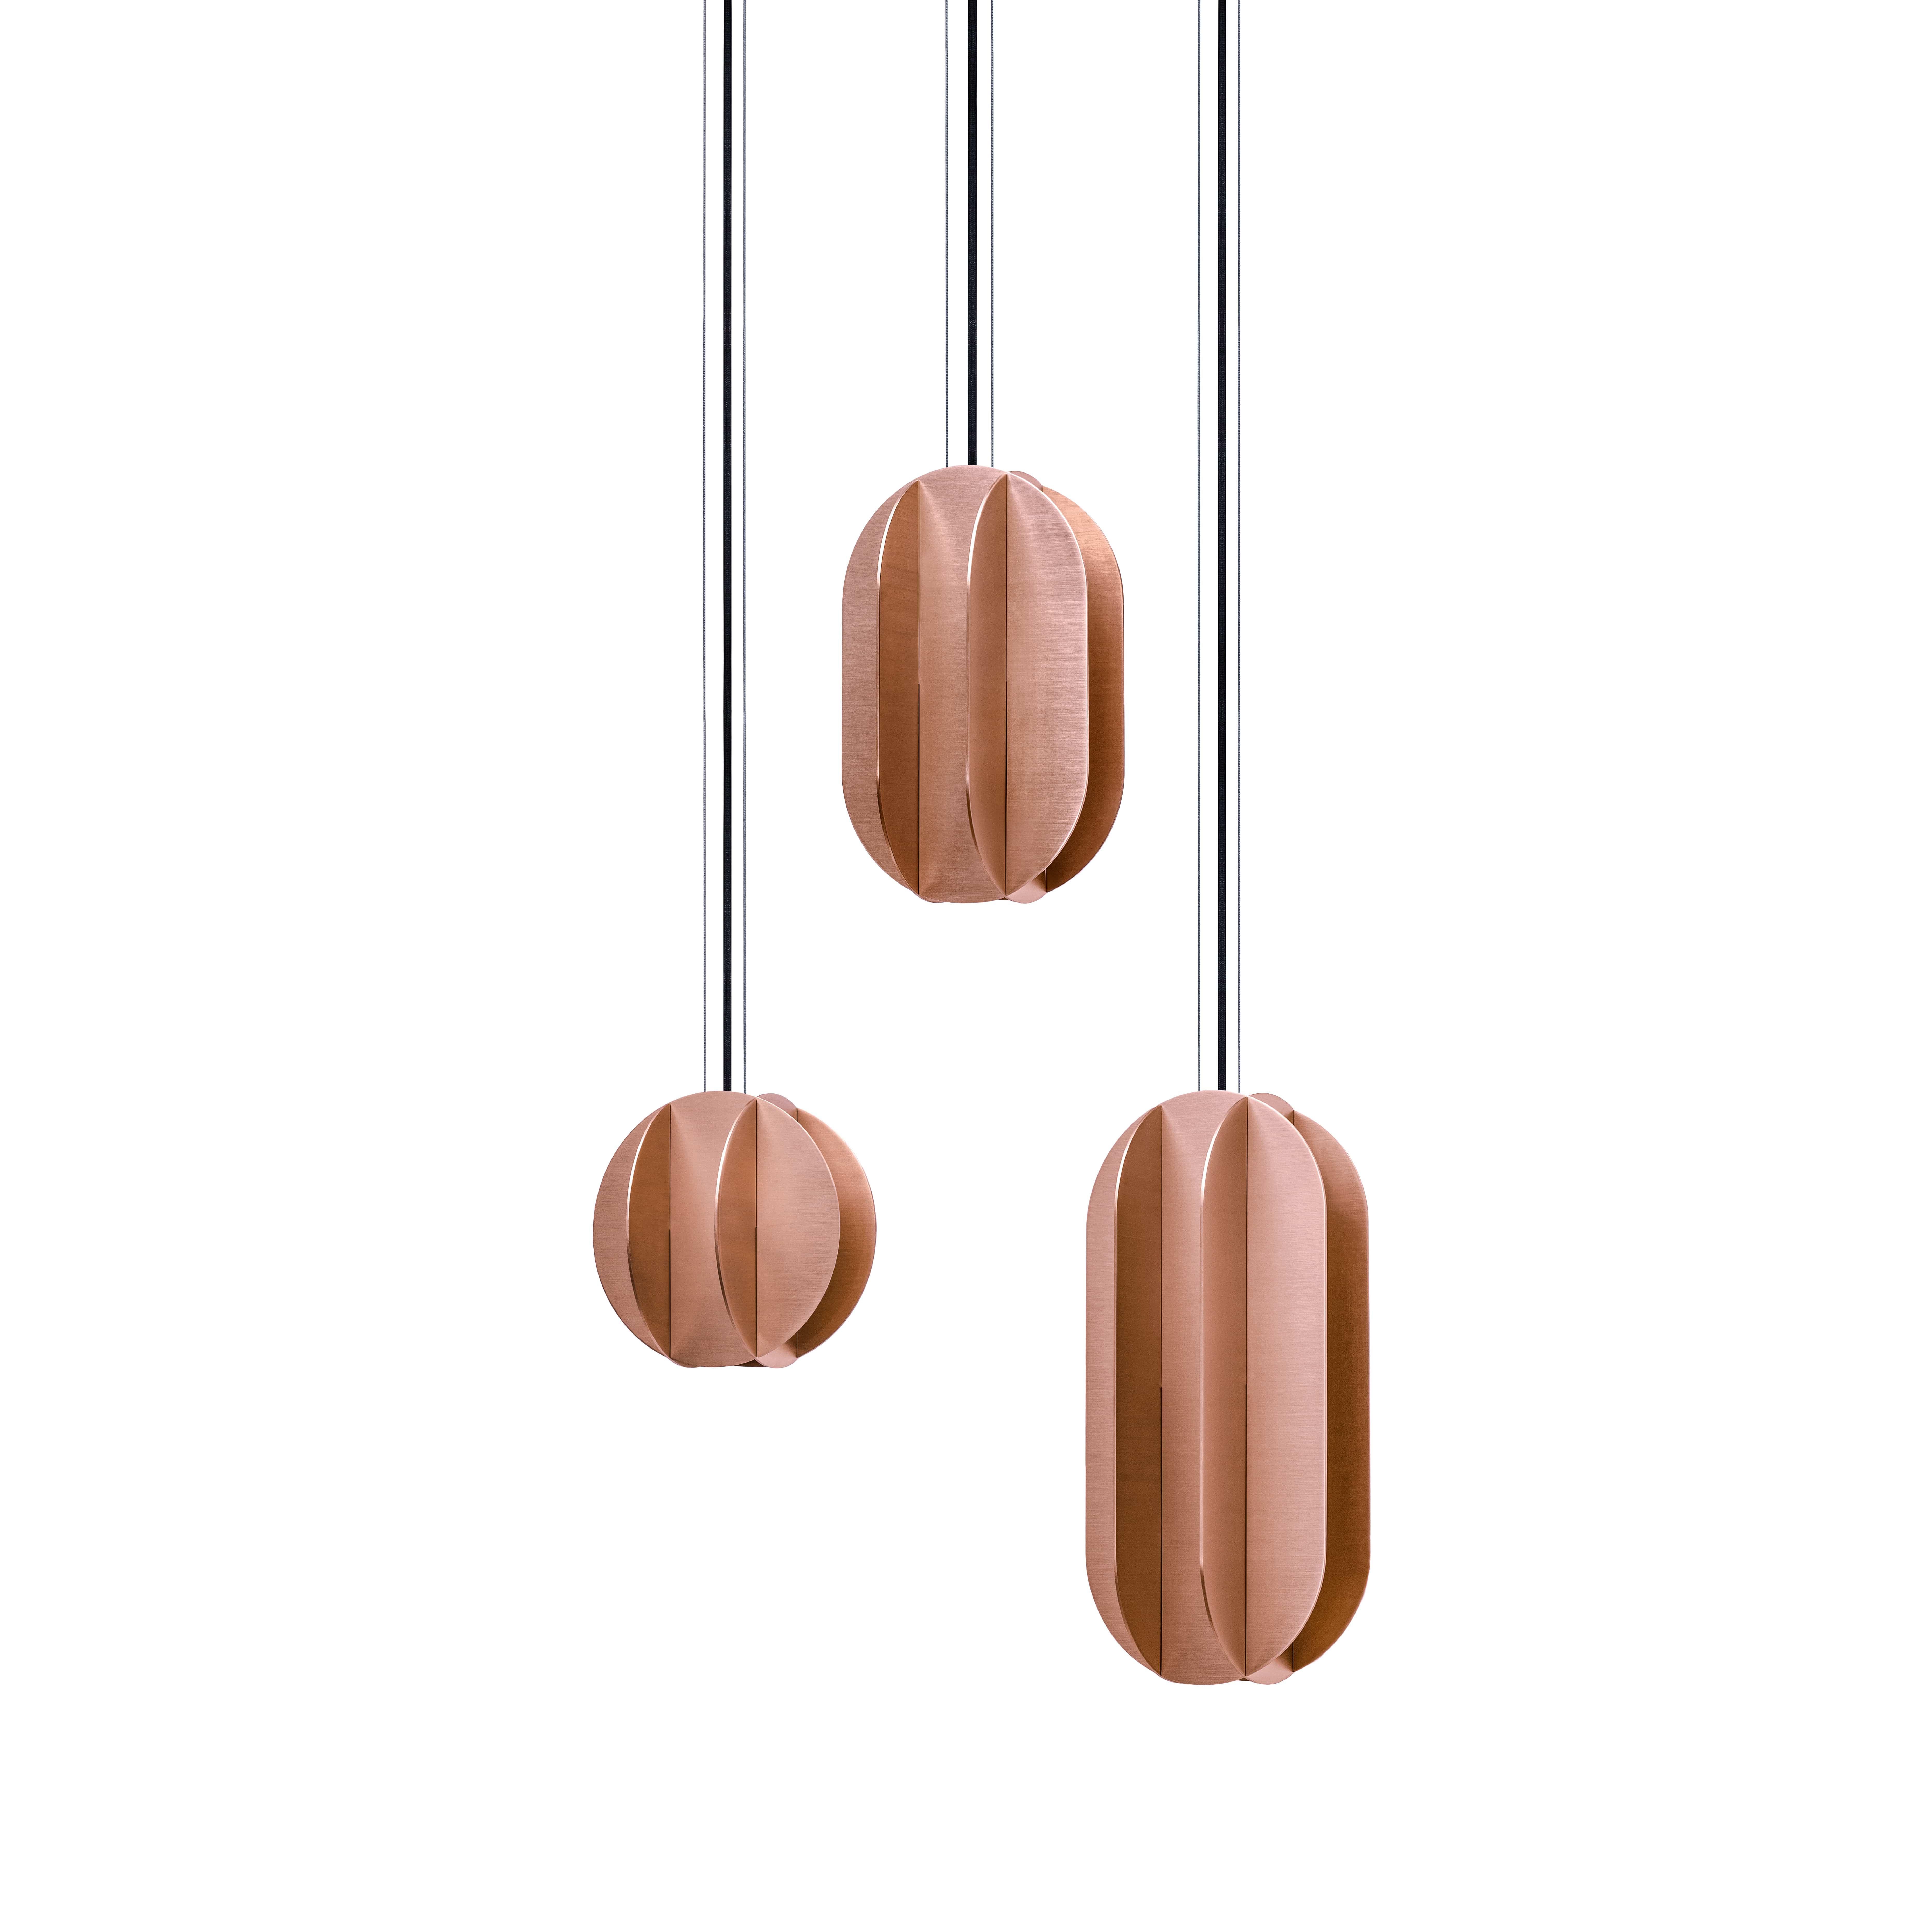 Set of Three Contemporary Pendant Lamp EL Lamps CS2 by NOOM in Copper 3